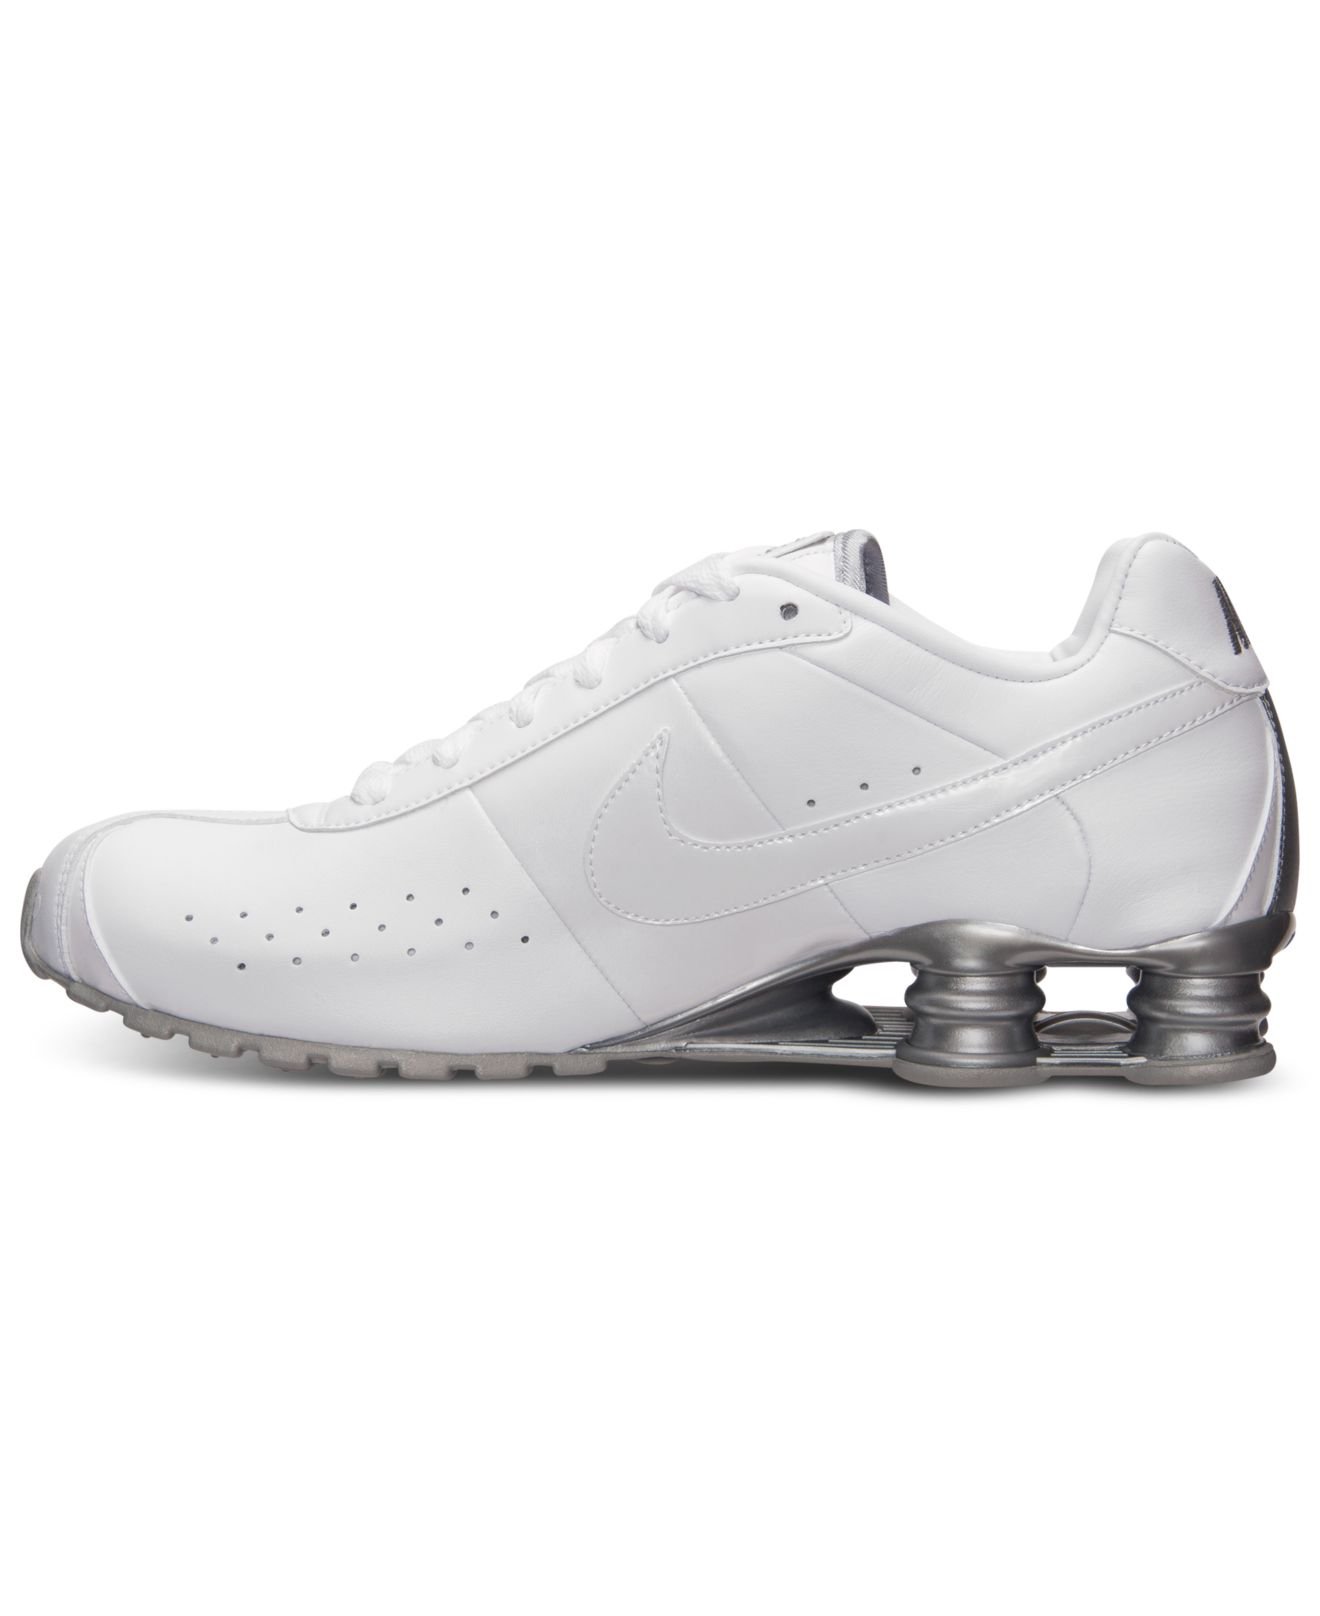 Lyst - Nike Men'S Shox Classic Ii Si Running Sneakers From Finish Line ...